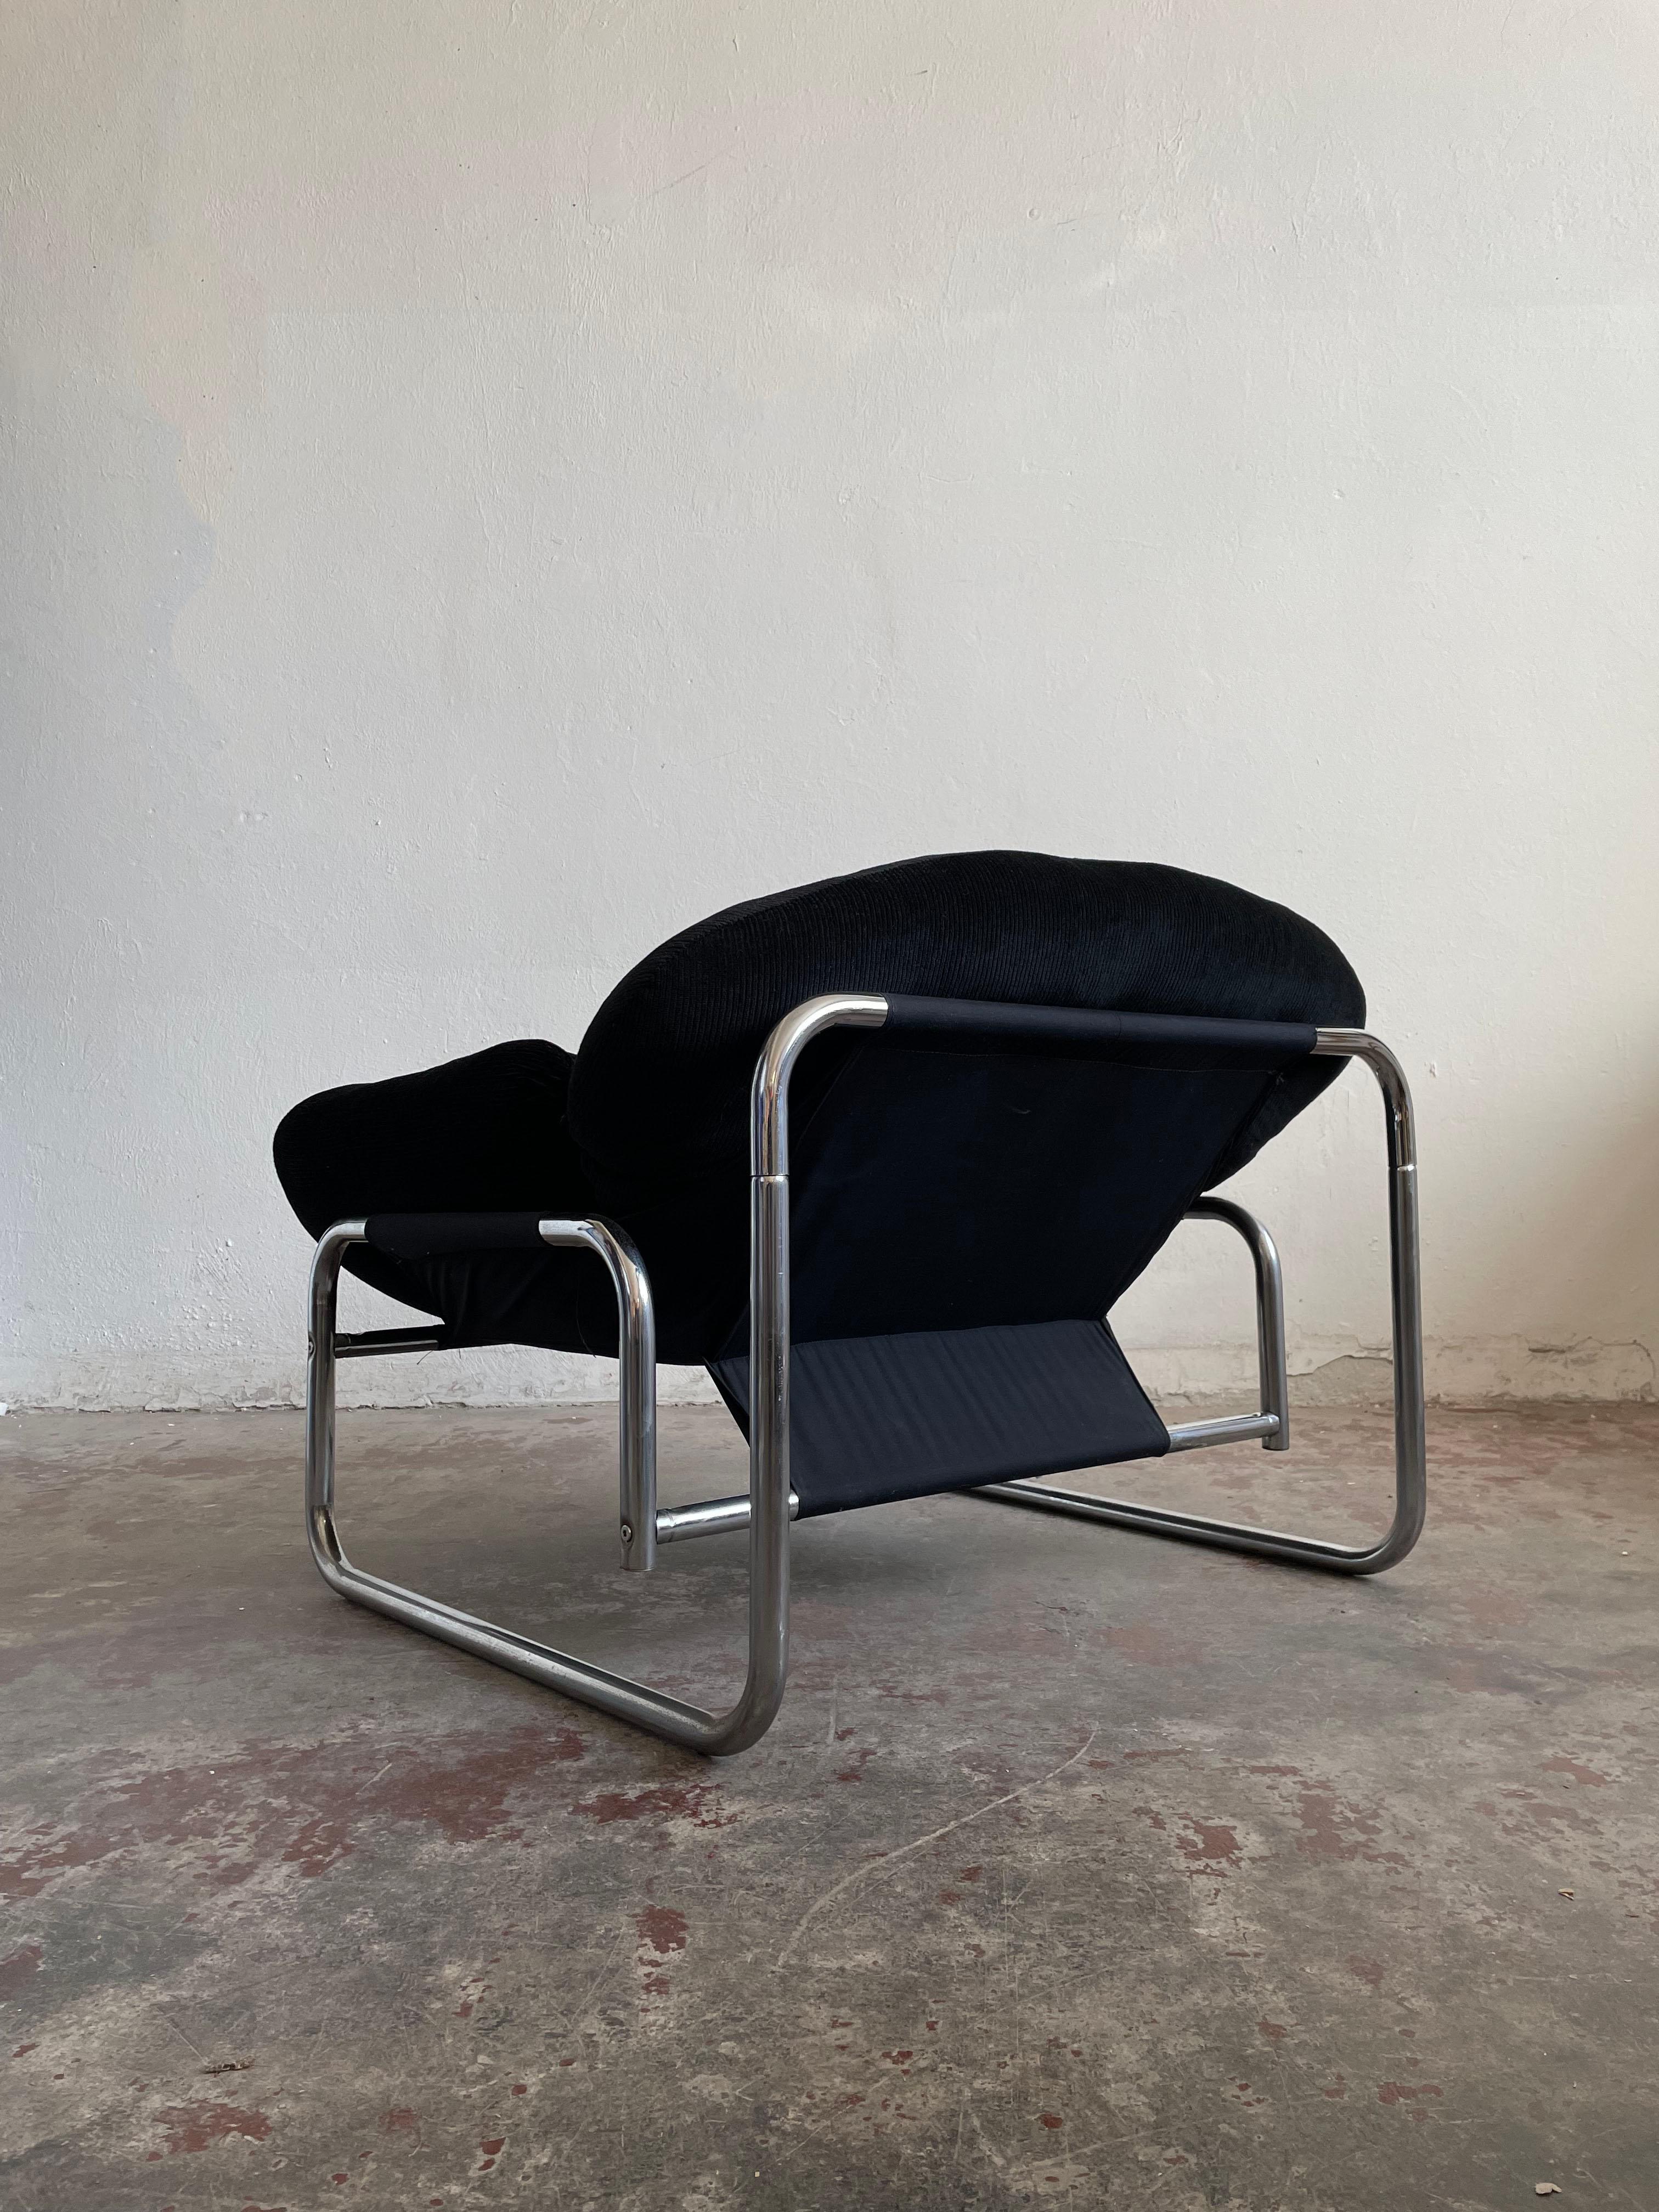 20th Century Lounge Chair from Swed Form, Sweden 1970s, Designed by Johan Bertil Häggström